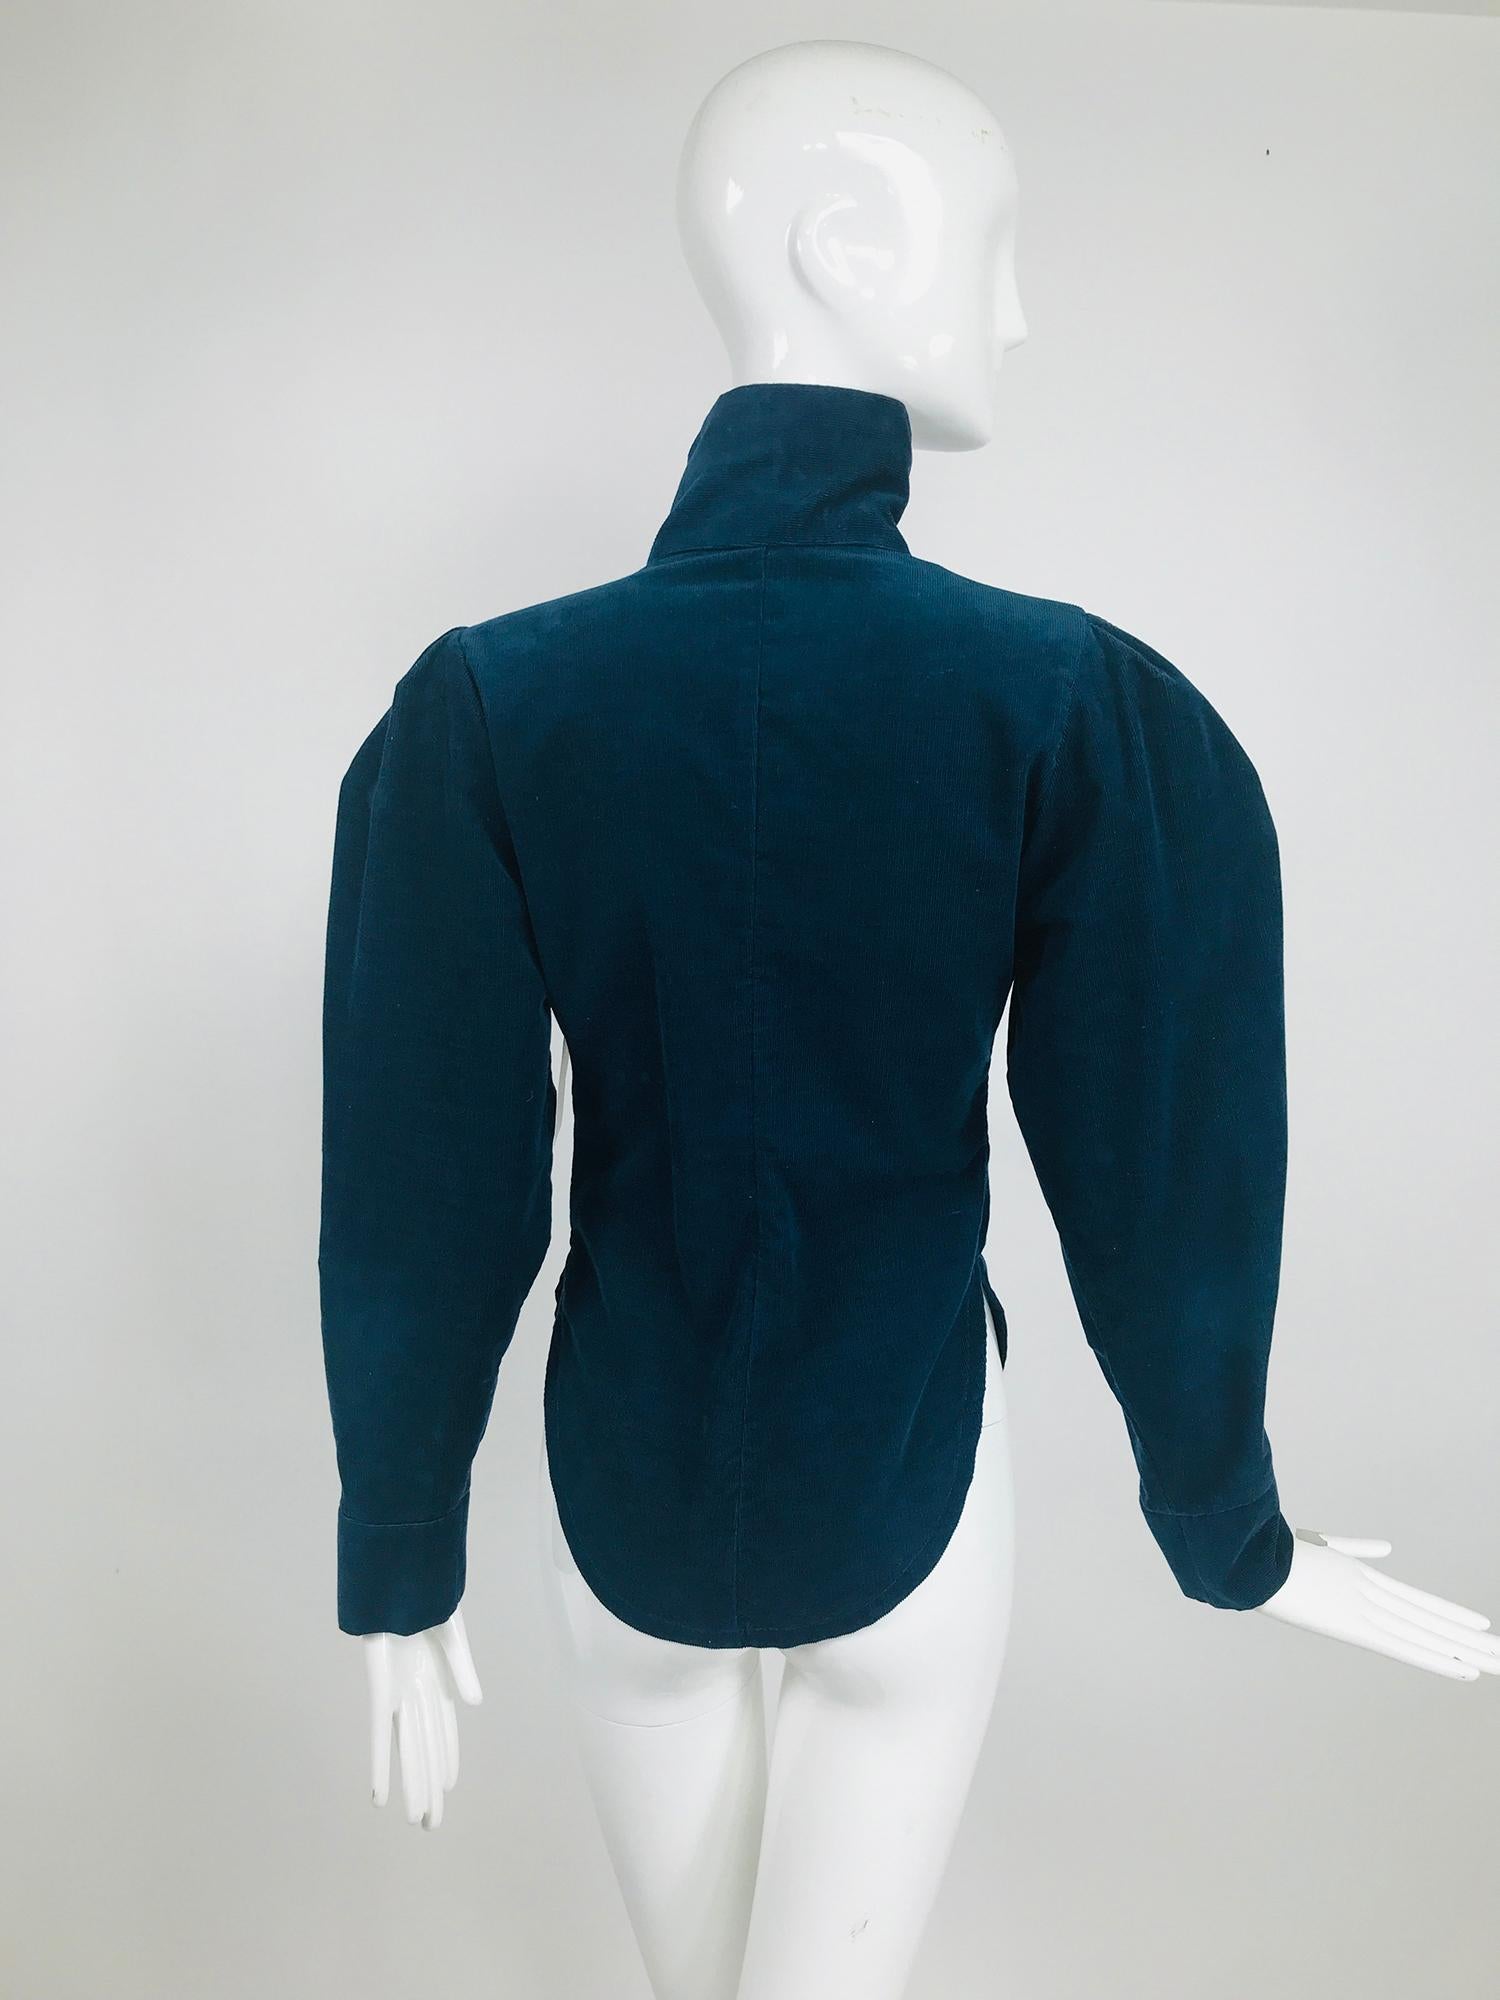 Vintage Norma Kamali Teal Blue Corduroy High Neck Fitted Shirt 1980s 2